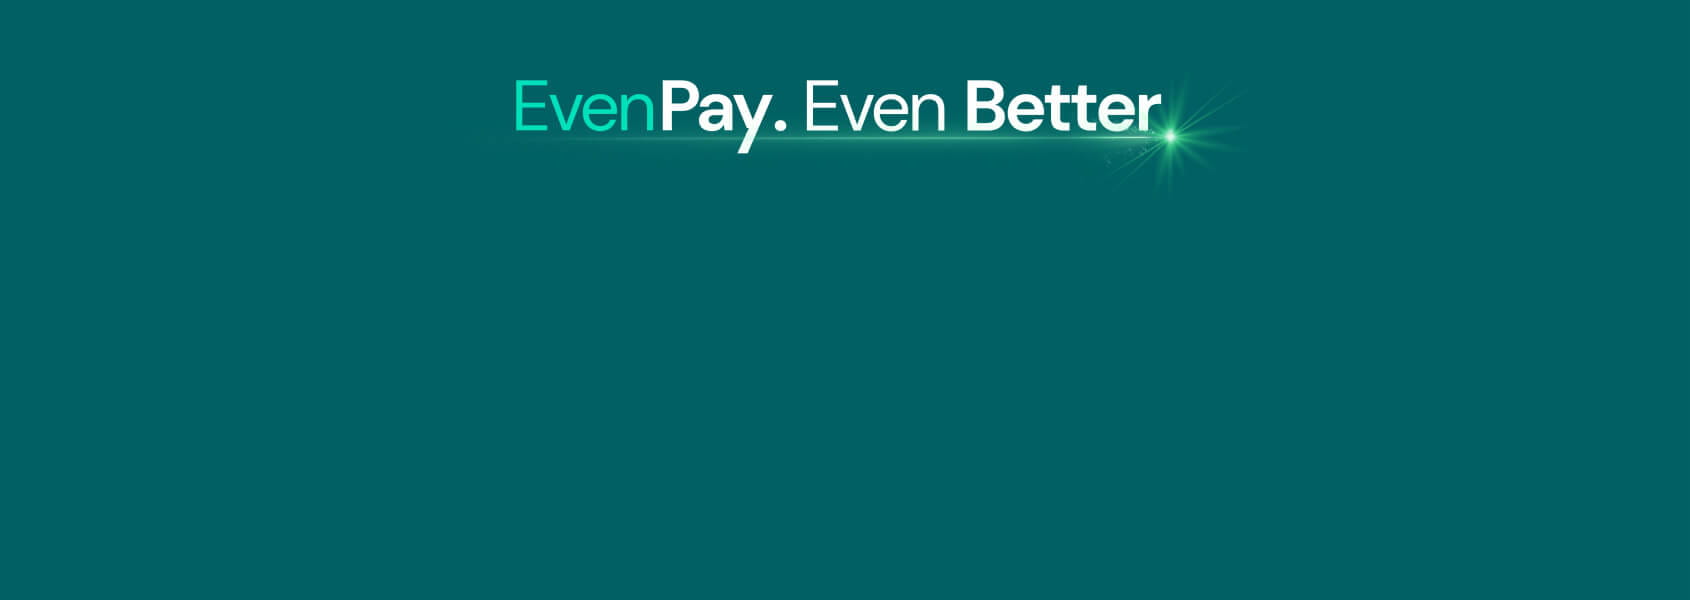 EvenPay Even Better with green background